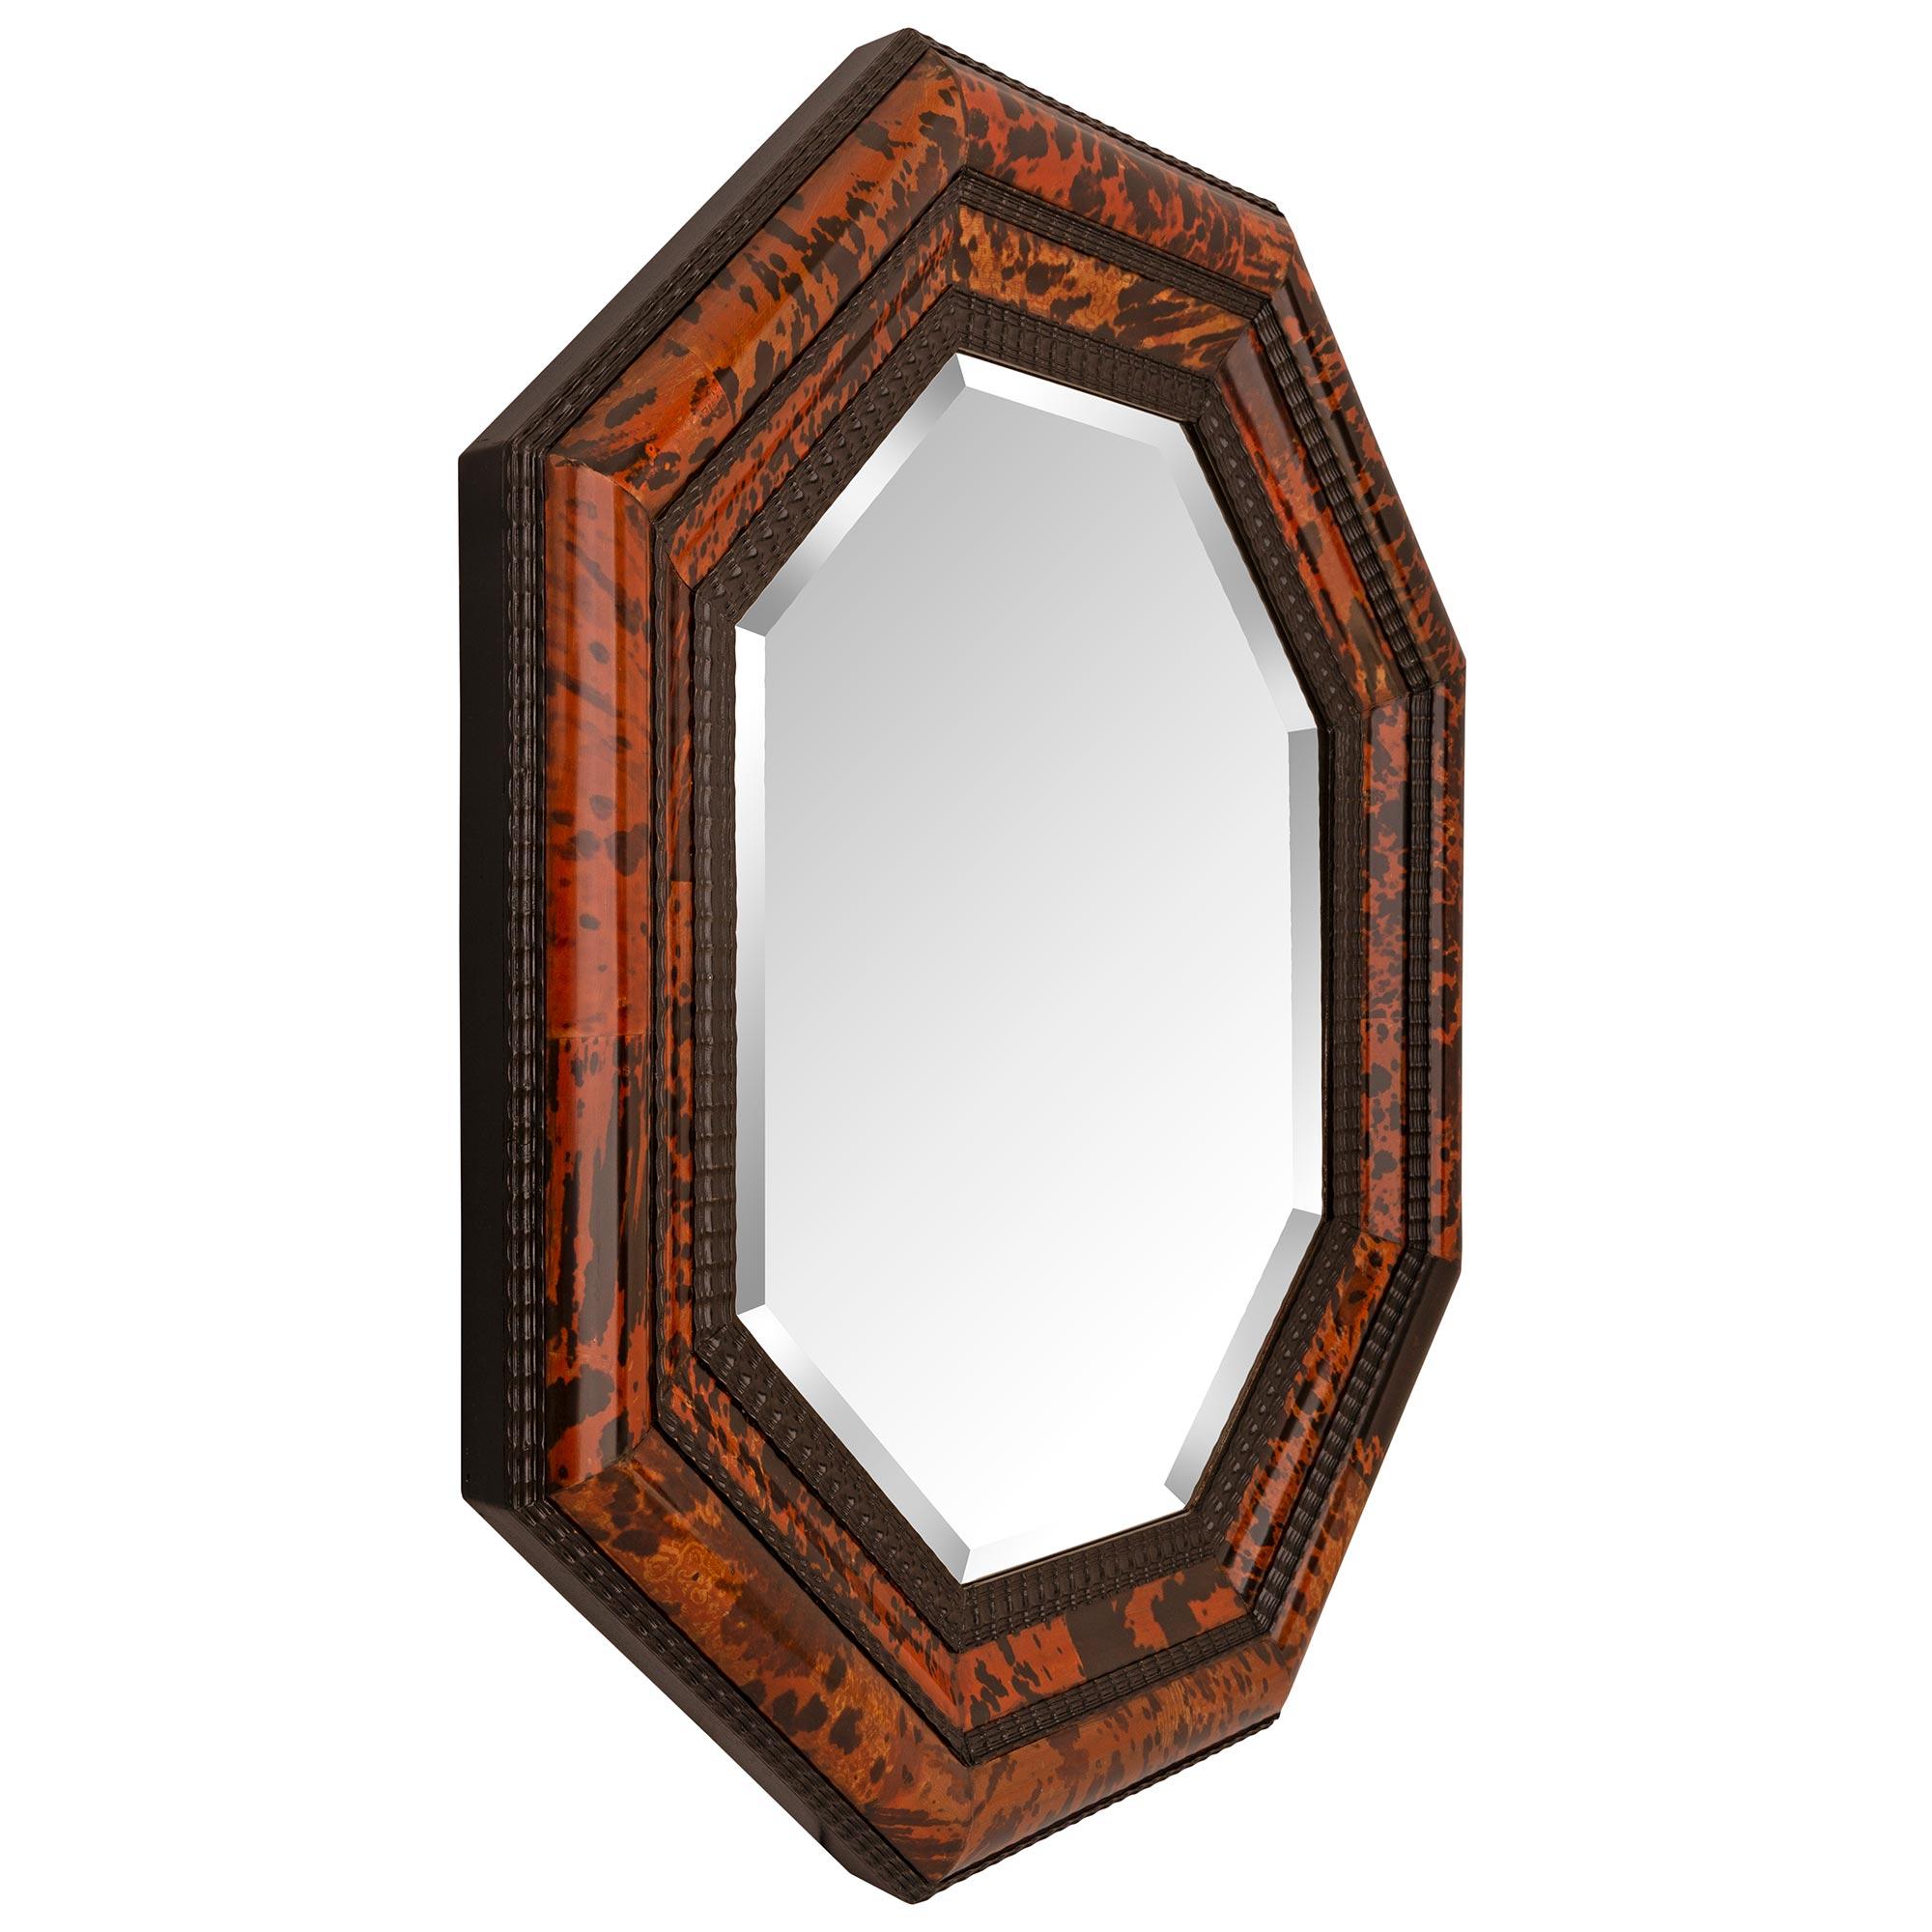 A stunning and most decorative Continental 19th century ebonized Fruitwood and Tortoiseshell mirror. The octagonal shaped mirror retains its original beautiful beveled mirror plate set within a striking mottled wavy designed wrap around band and